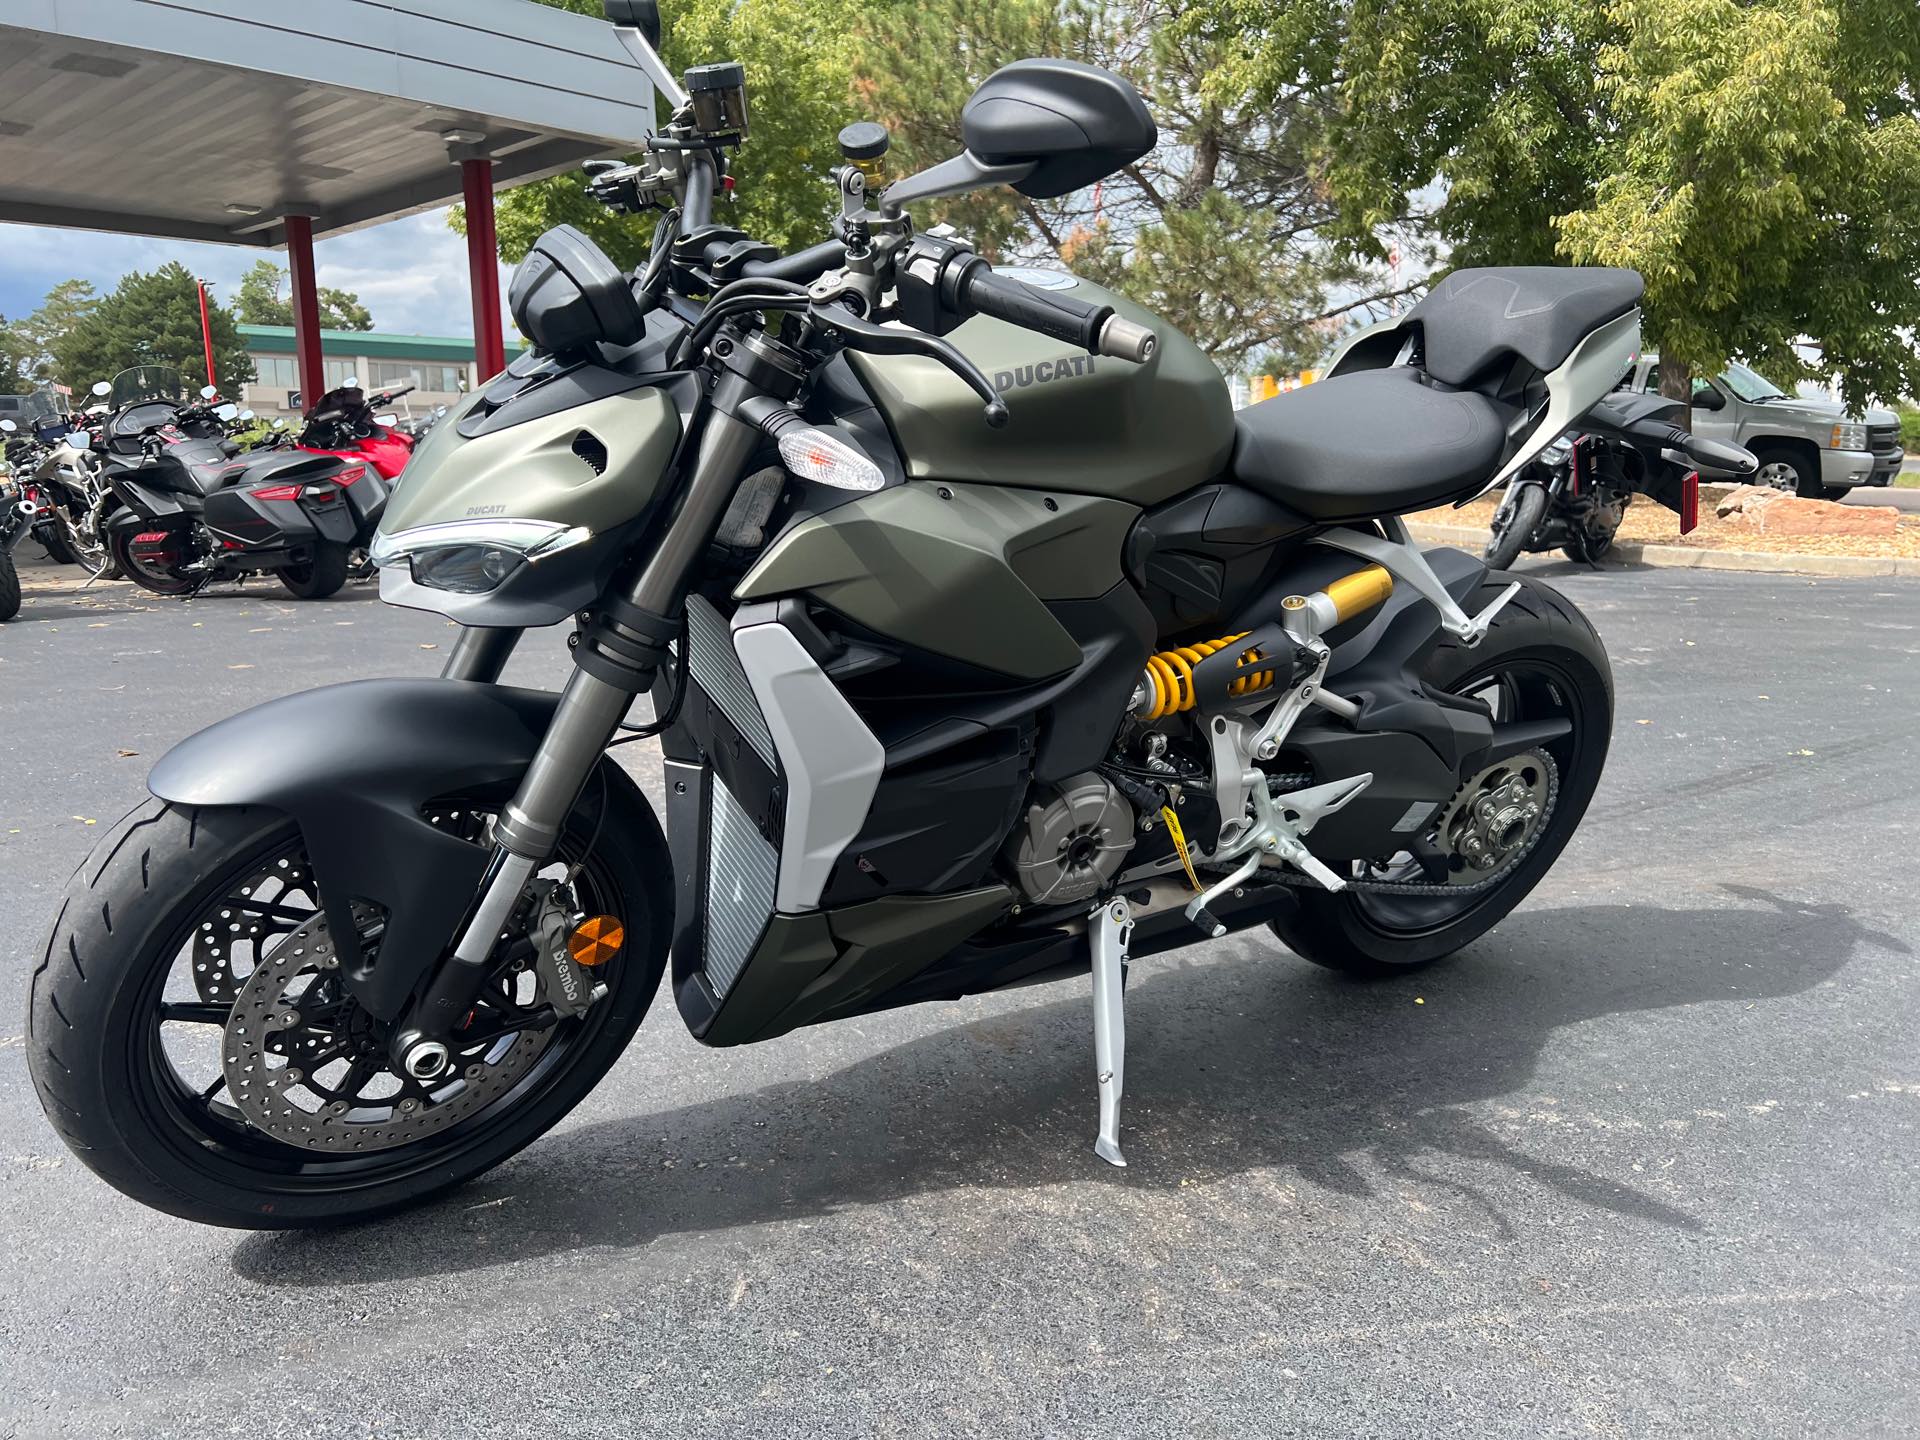 2024 Ducati Streetfighter V2 at Aces Motorcycles - Fort Collins